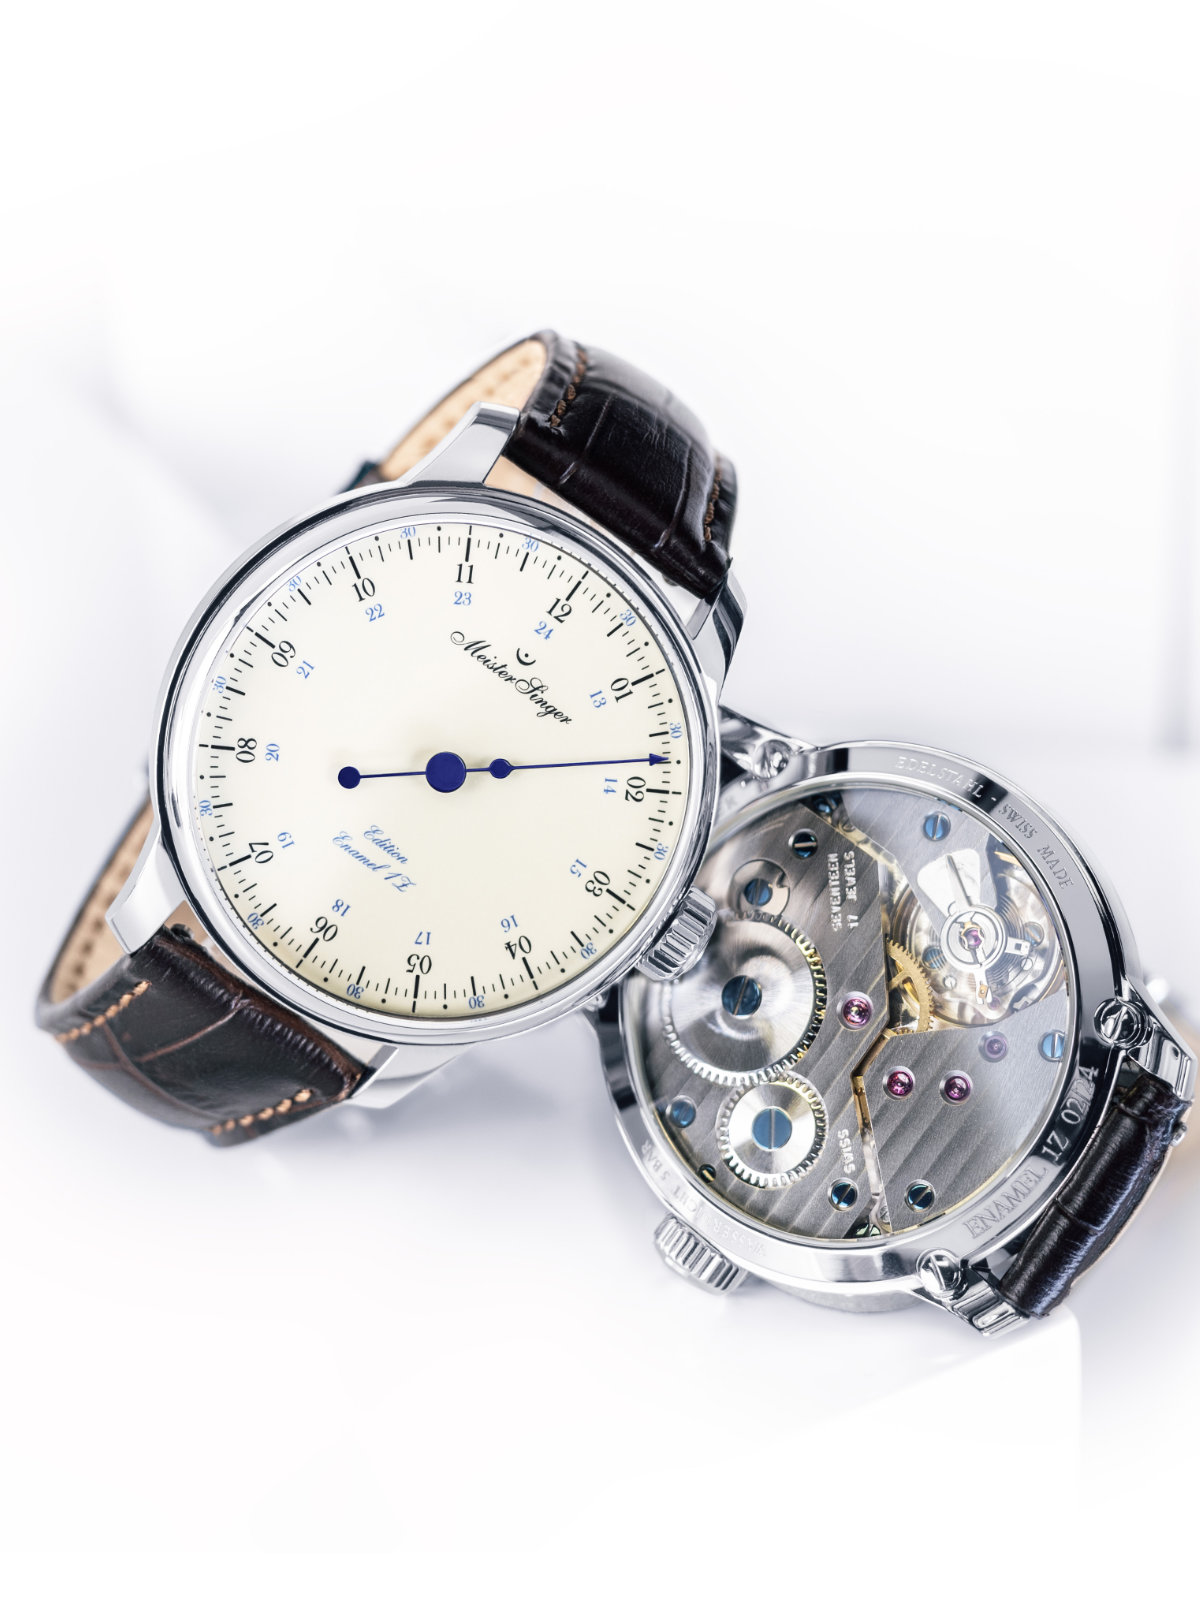 IFL Watches Introduces The Limited Edition Citizen Tsuyosa Automatic Free Willie